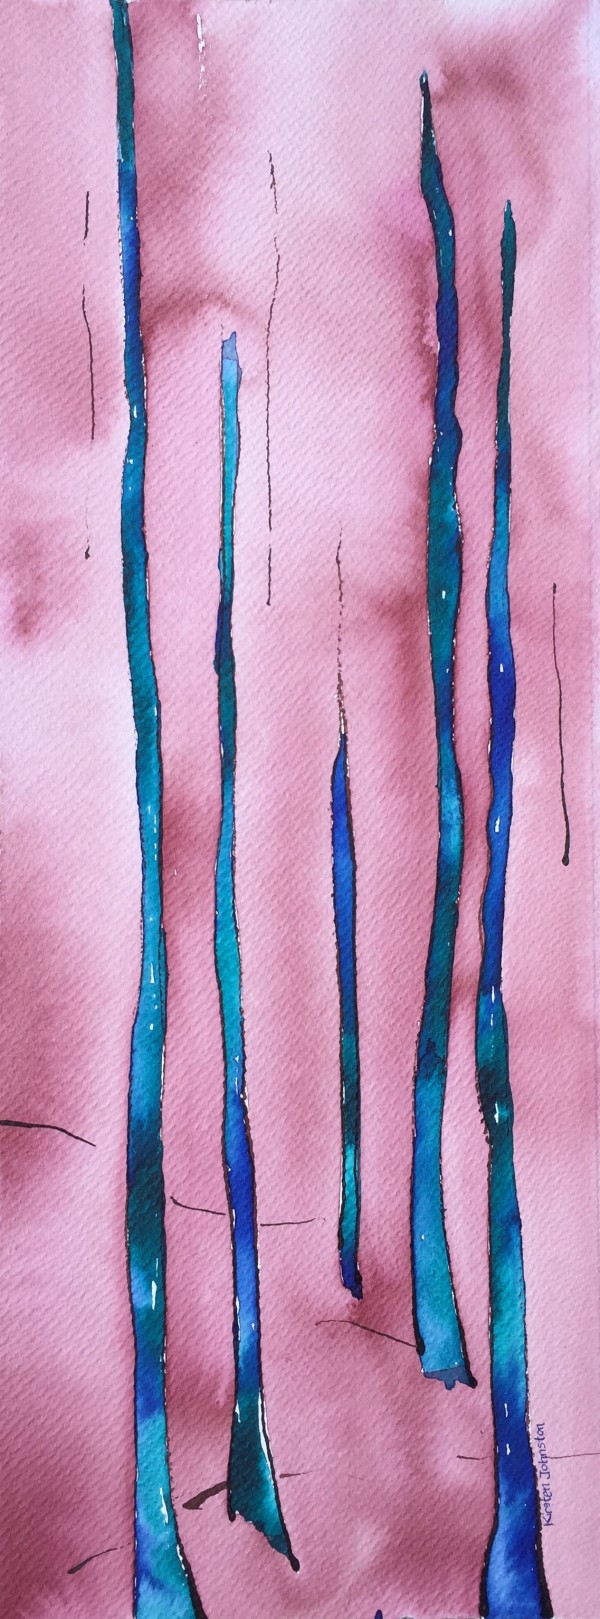 Tall trees with pink